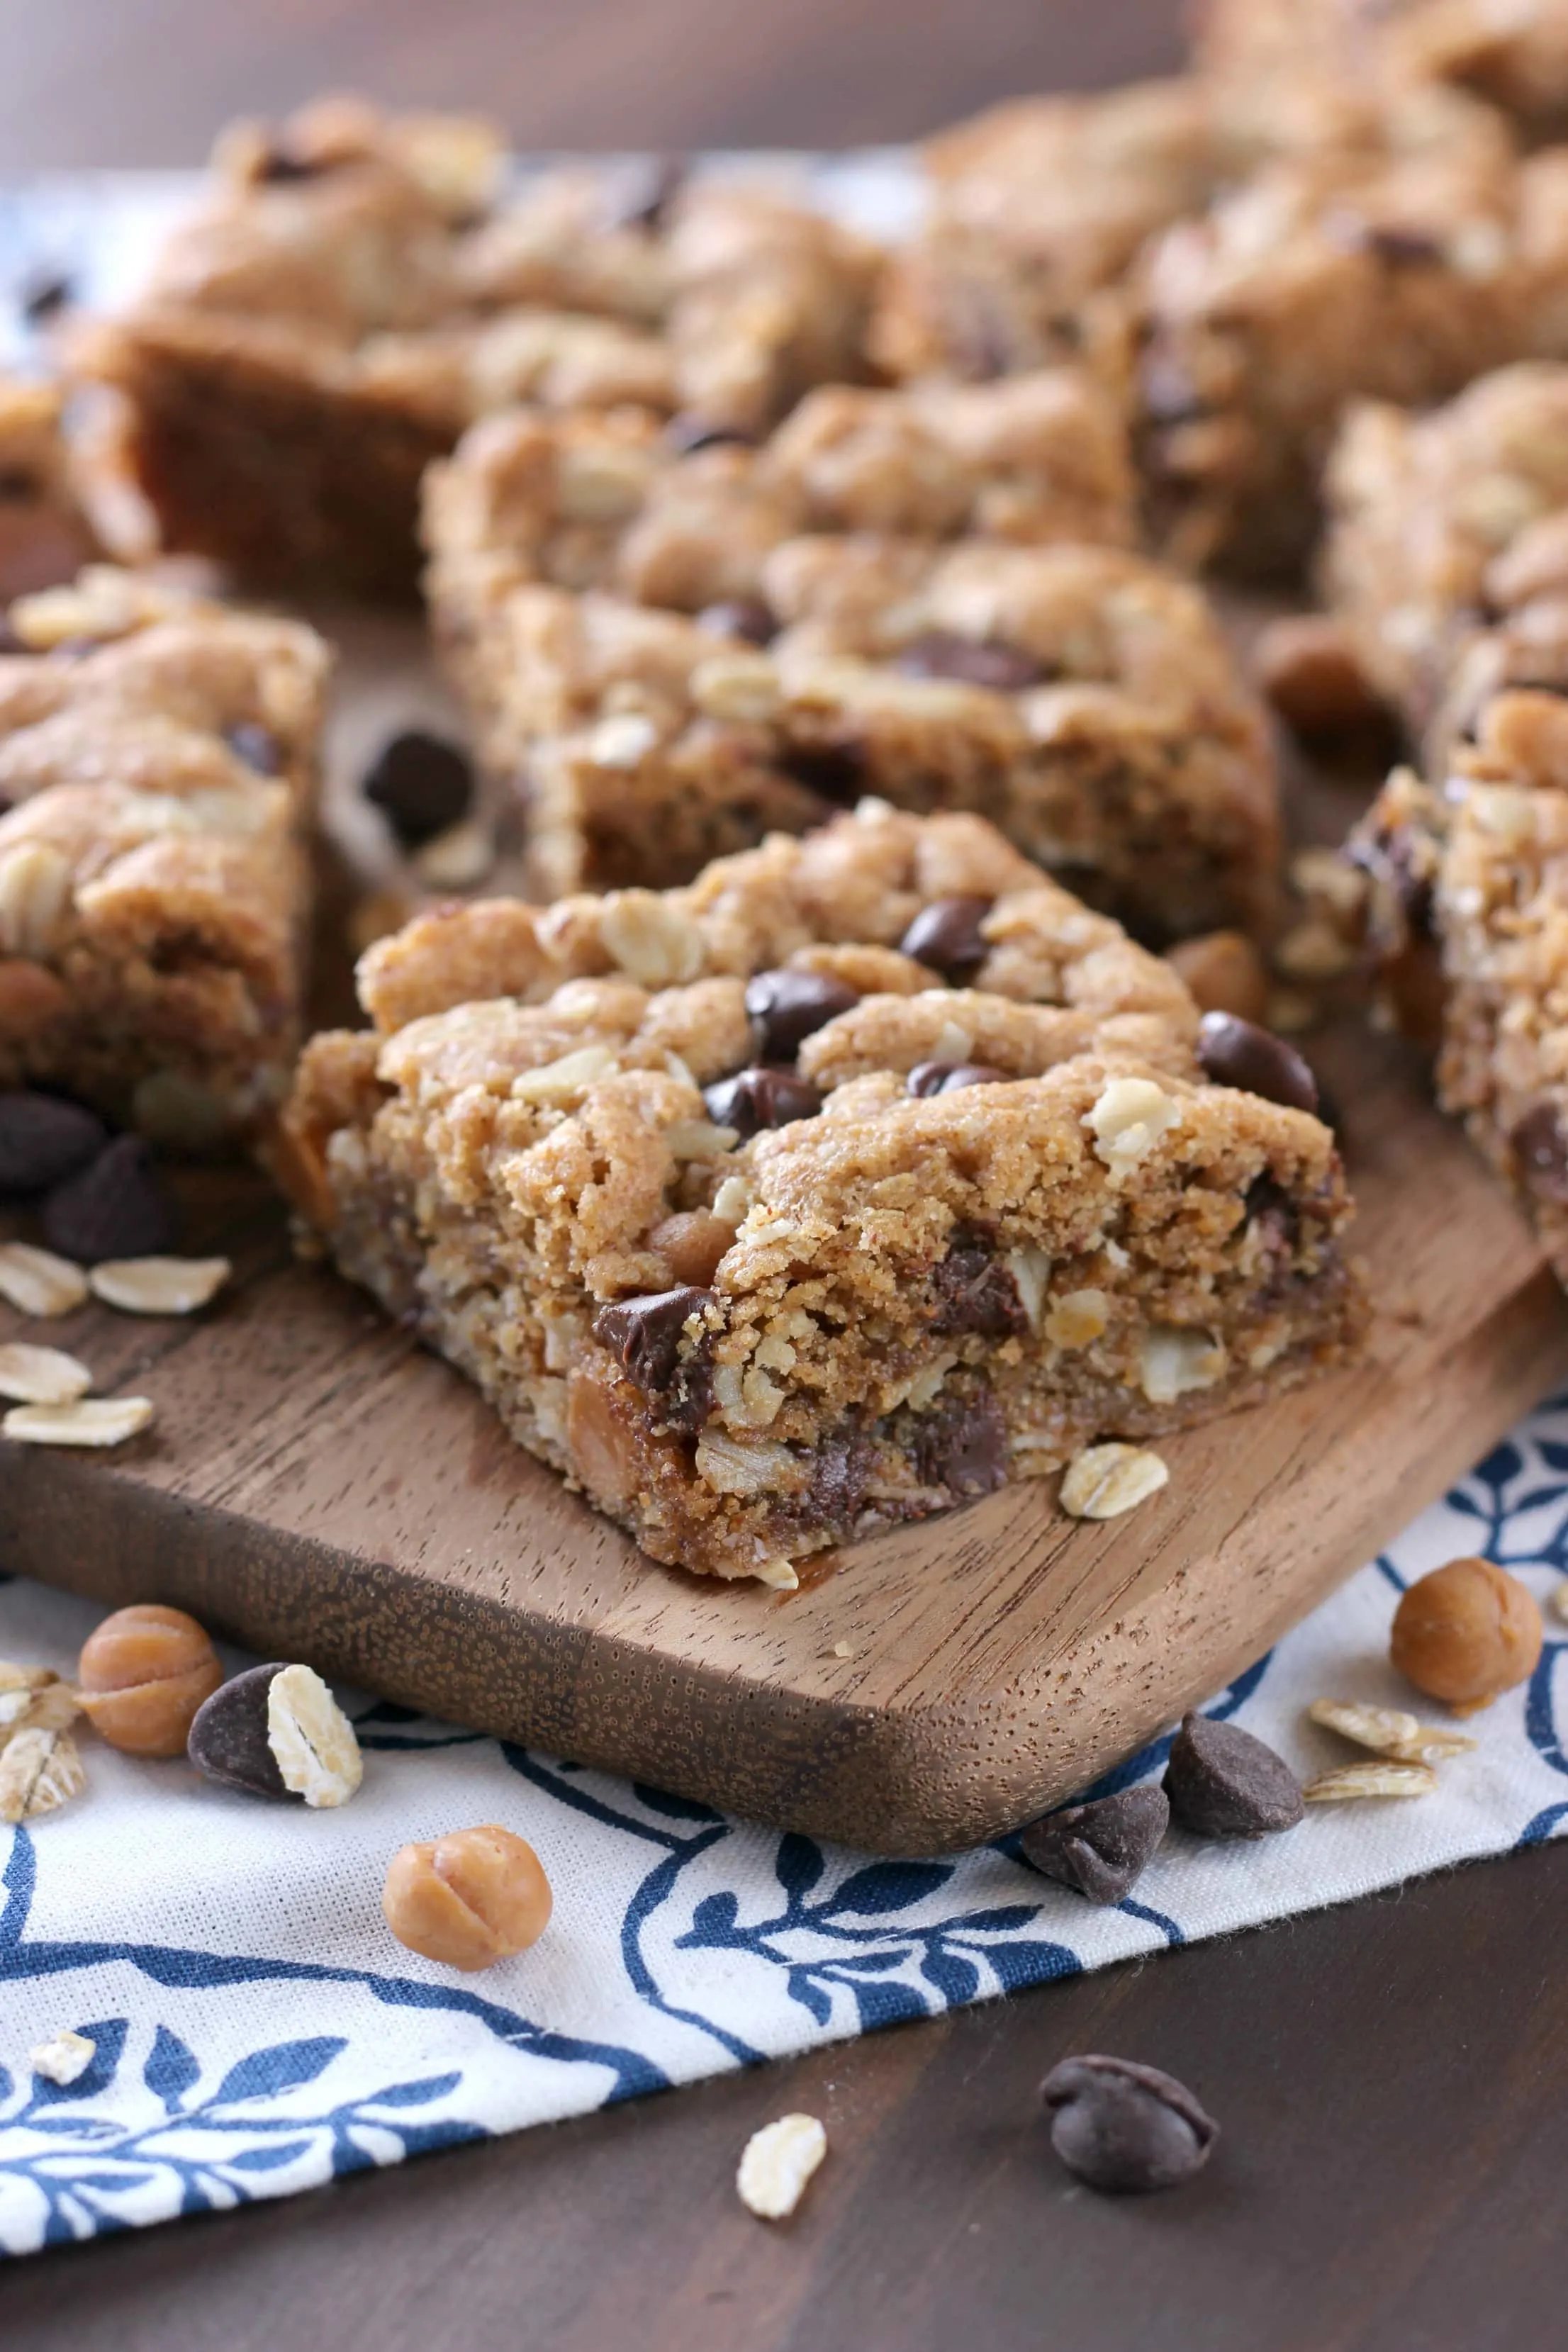 Chocolate Caramel Almond Butter Oatmeal Bars Recipe from A Kitchen Addiction